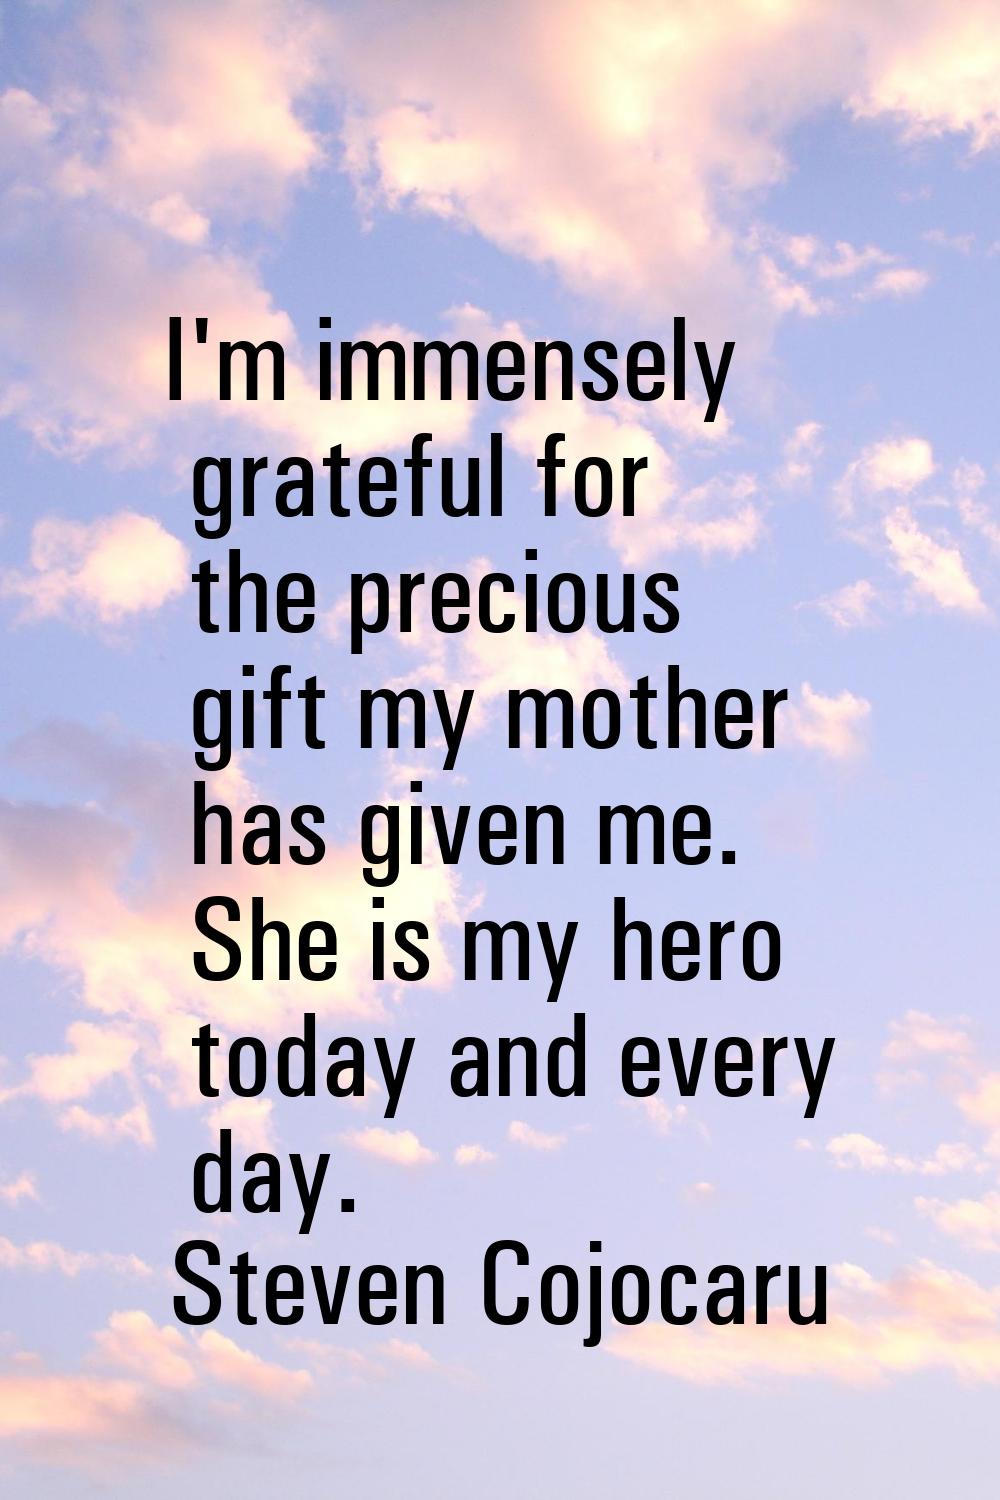 I'm immensely grateful for the precious gift my mother has given me. She is my hero today and every